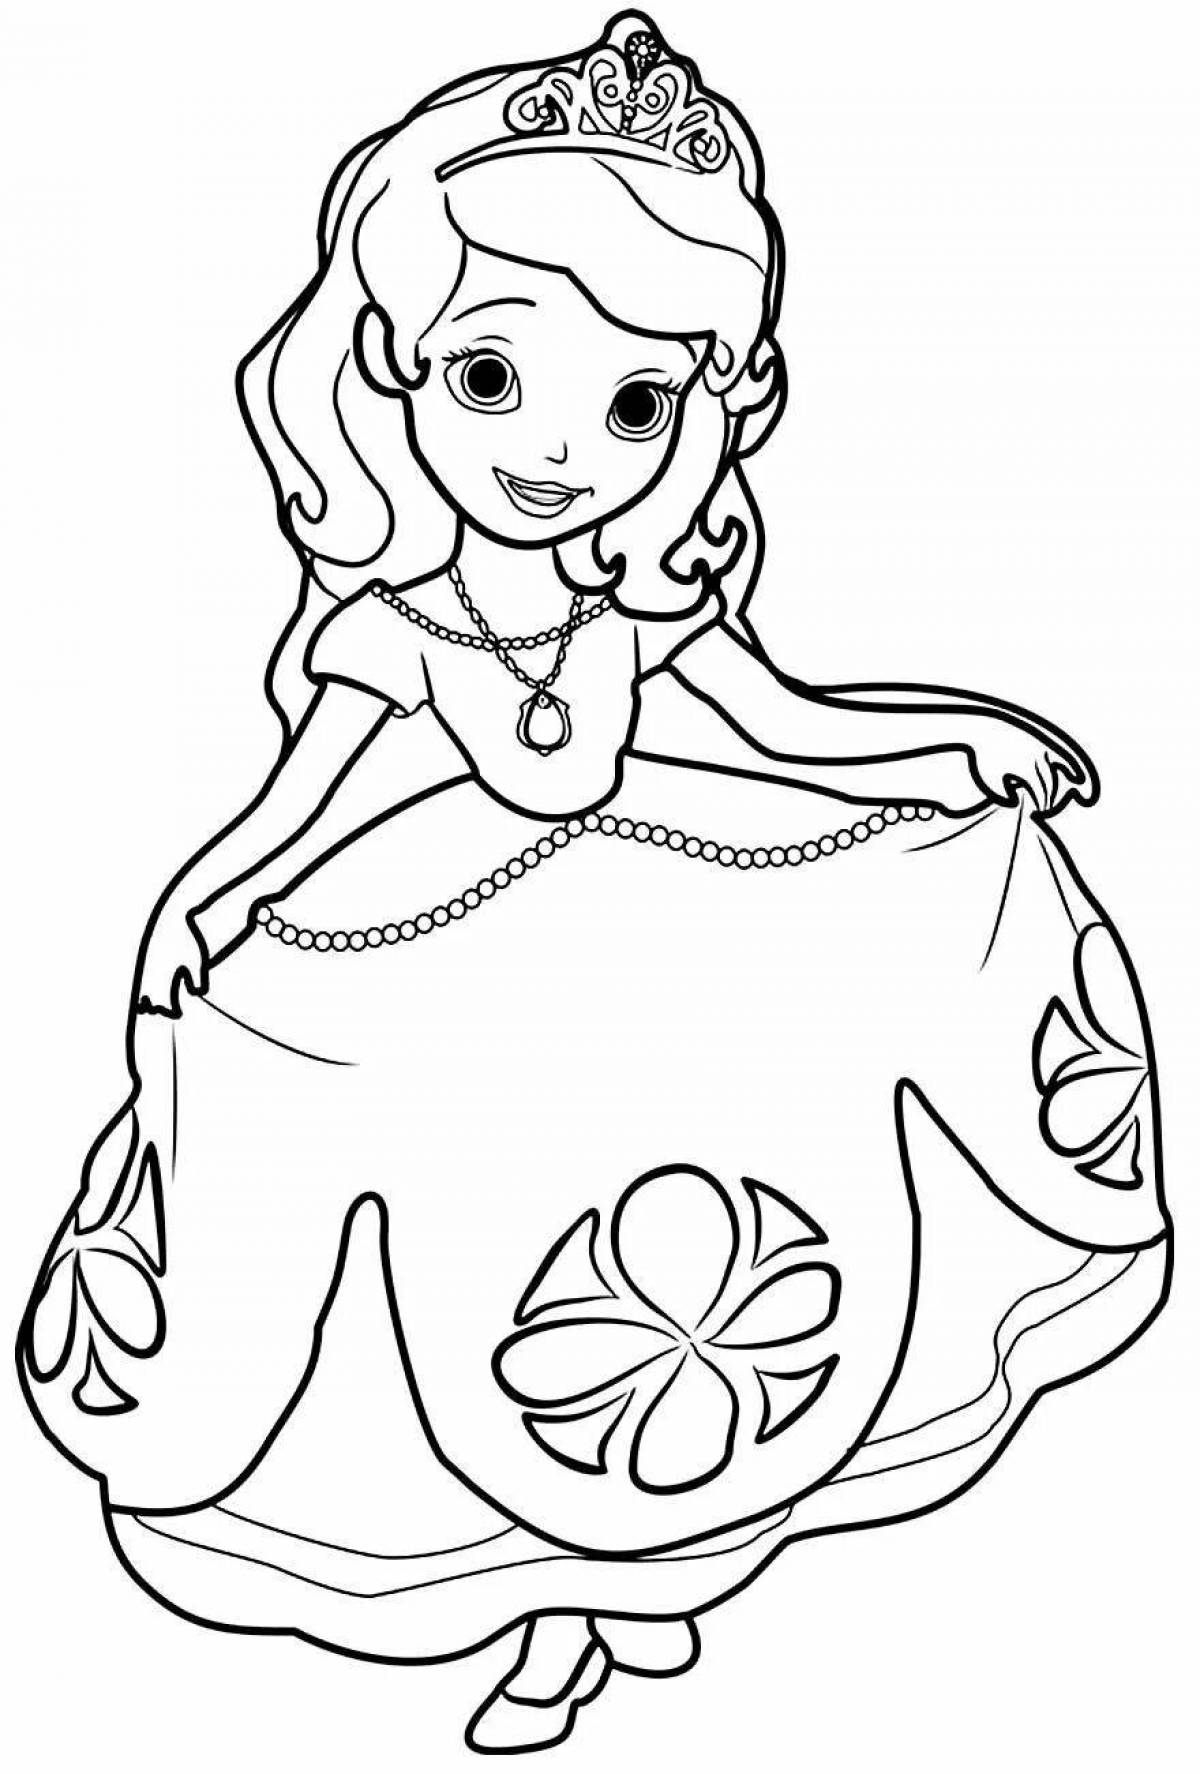 Gorgeous coloring book for girls 3 years old princess